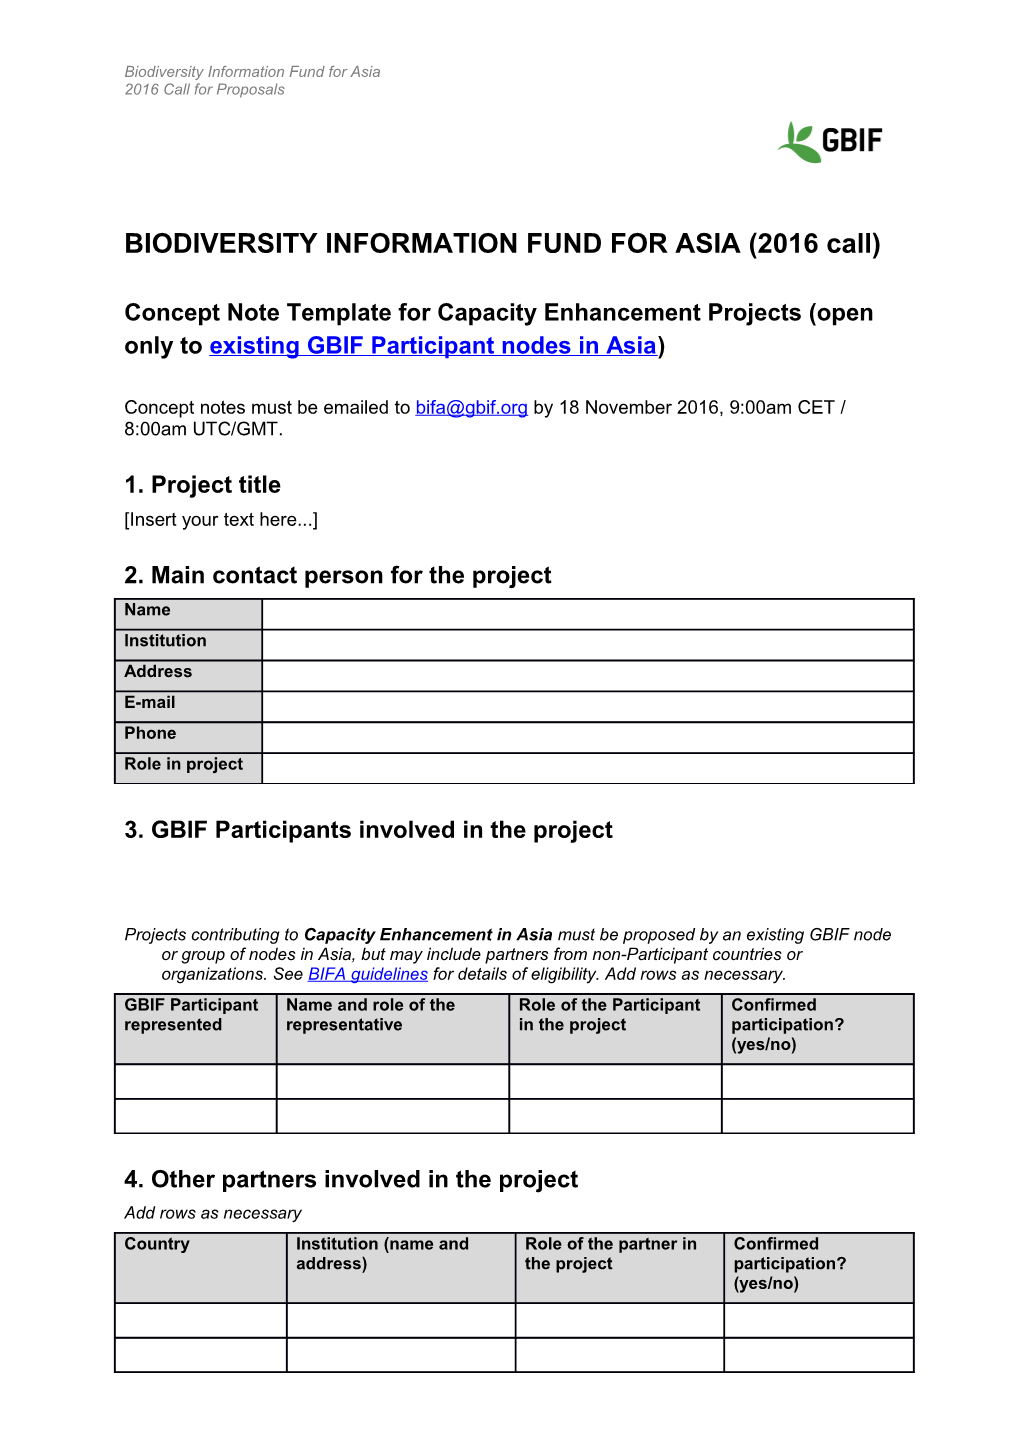 BIODIVERSITY INFORMATION FUND for ASIA(2016 Call)